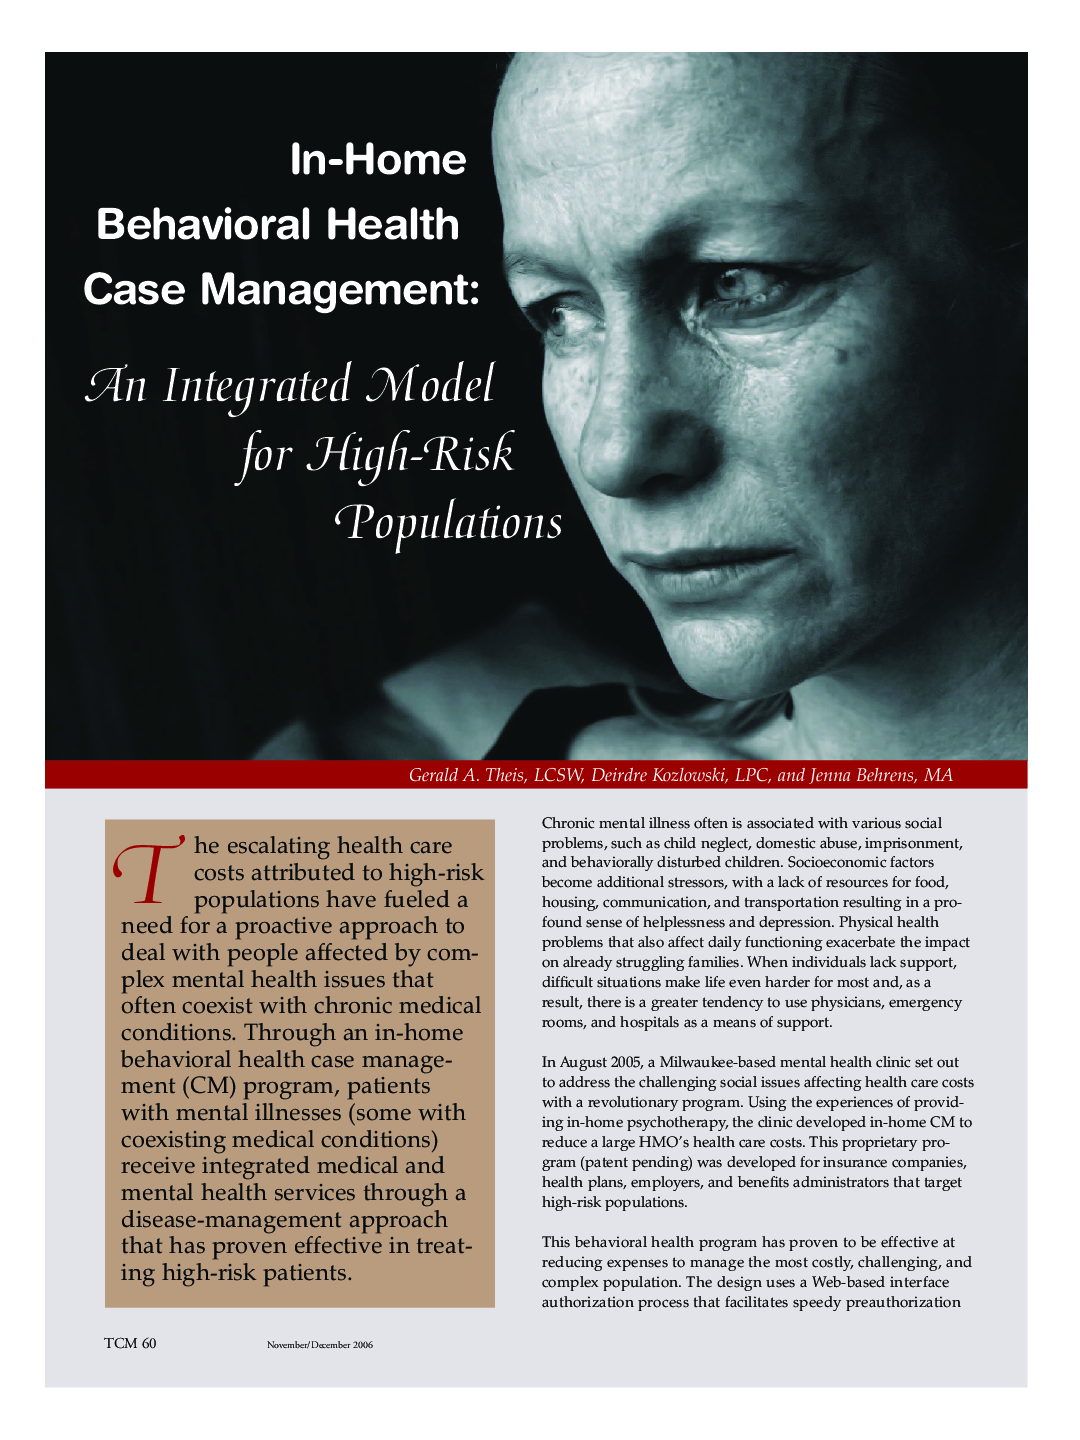 In-home behavioral health case management: An integrated model for high-risk populations 